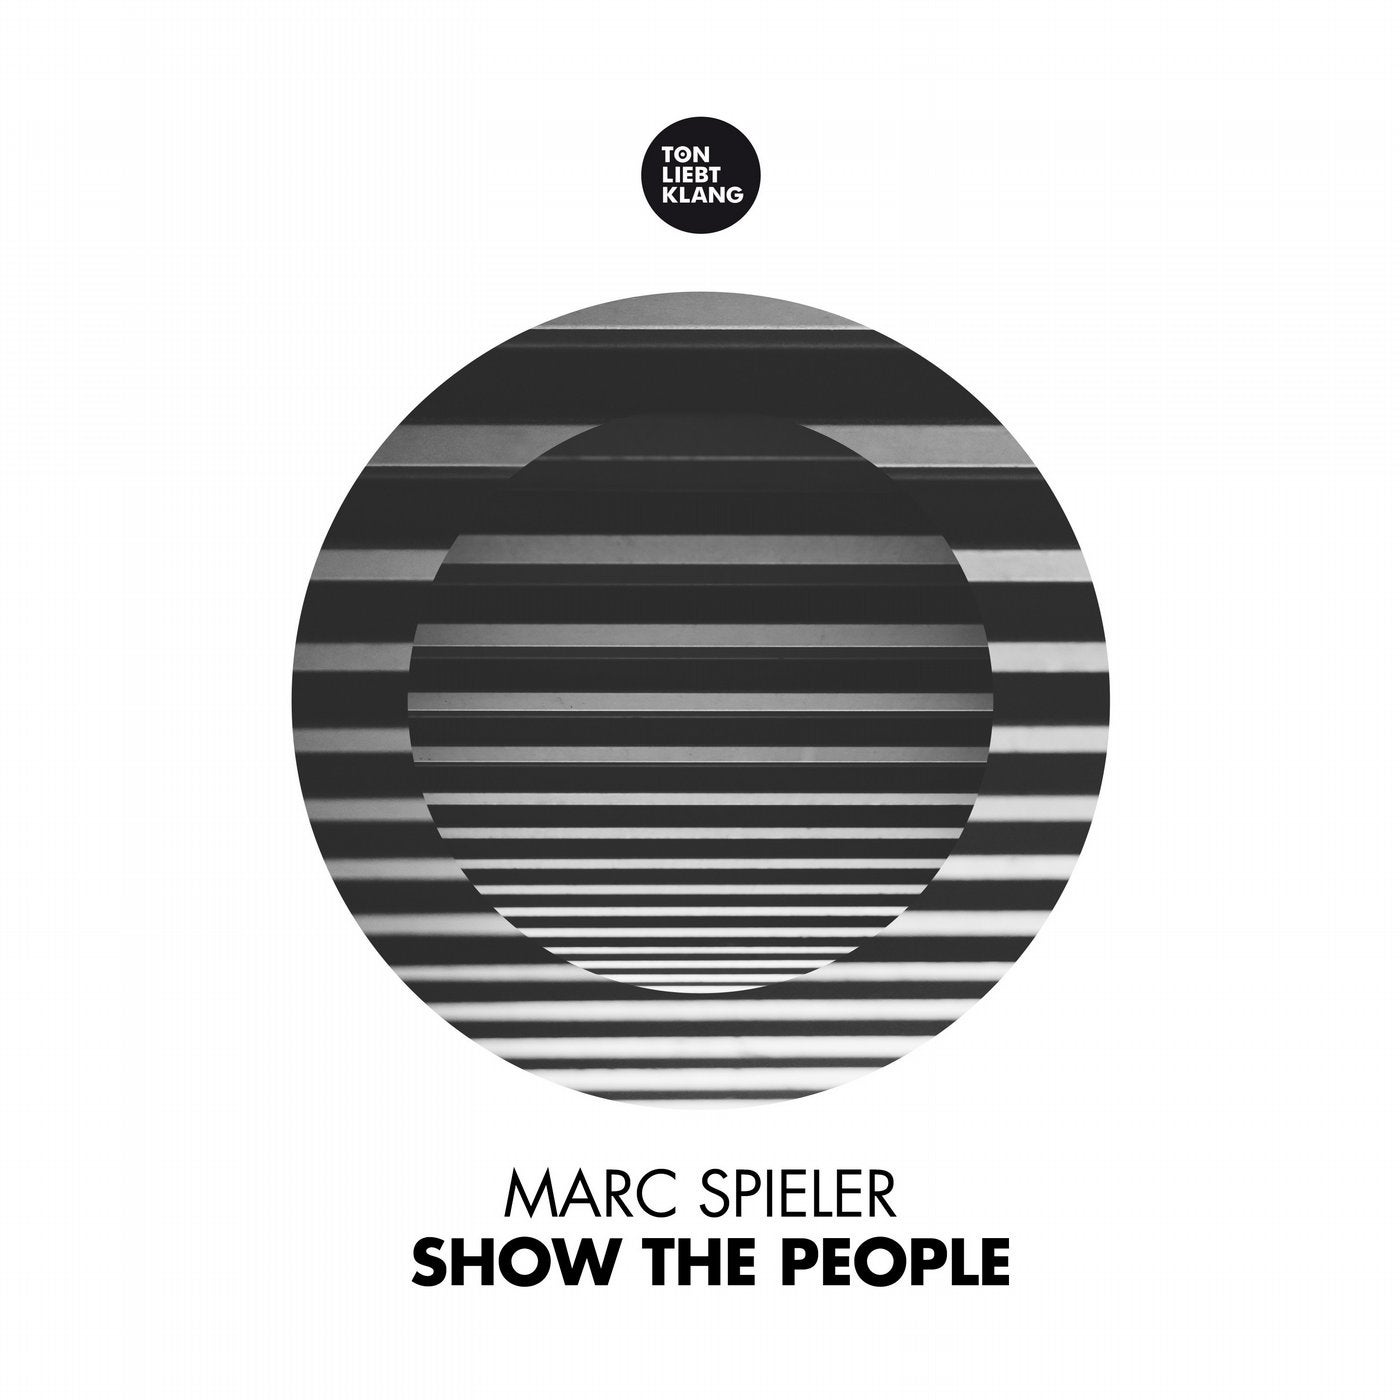 Show the People